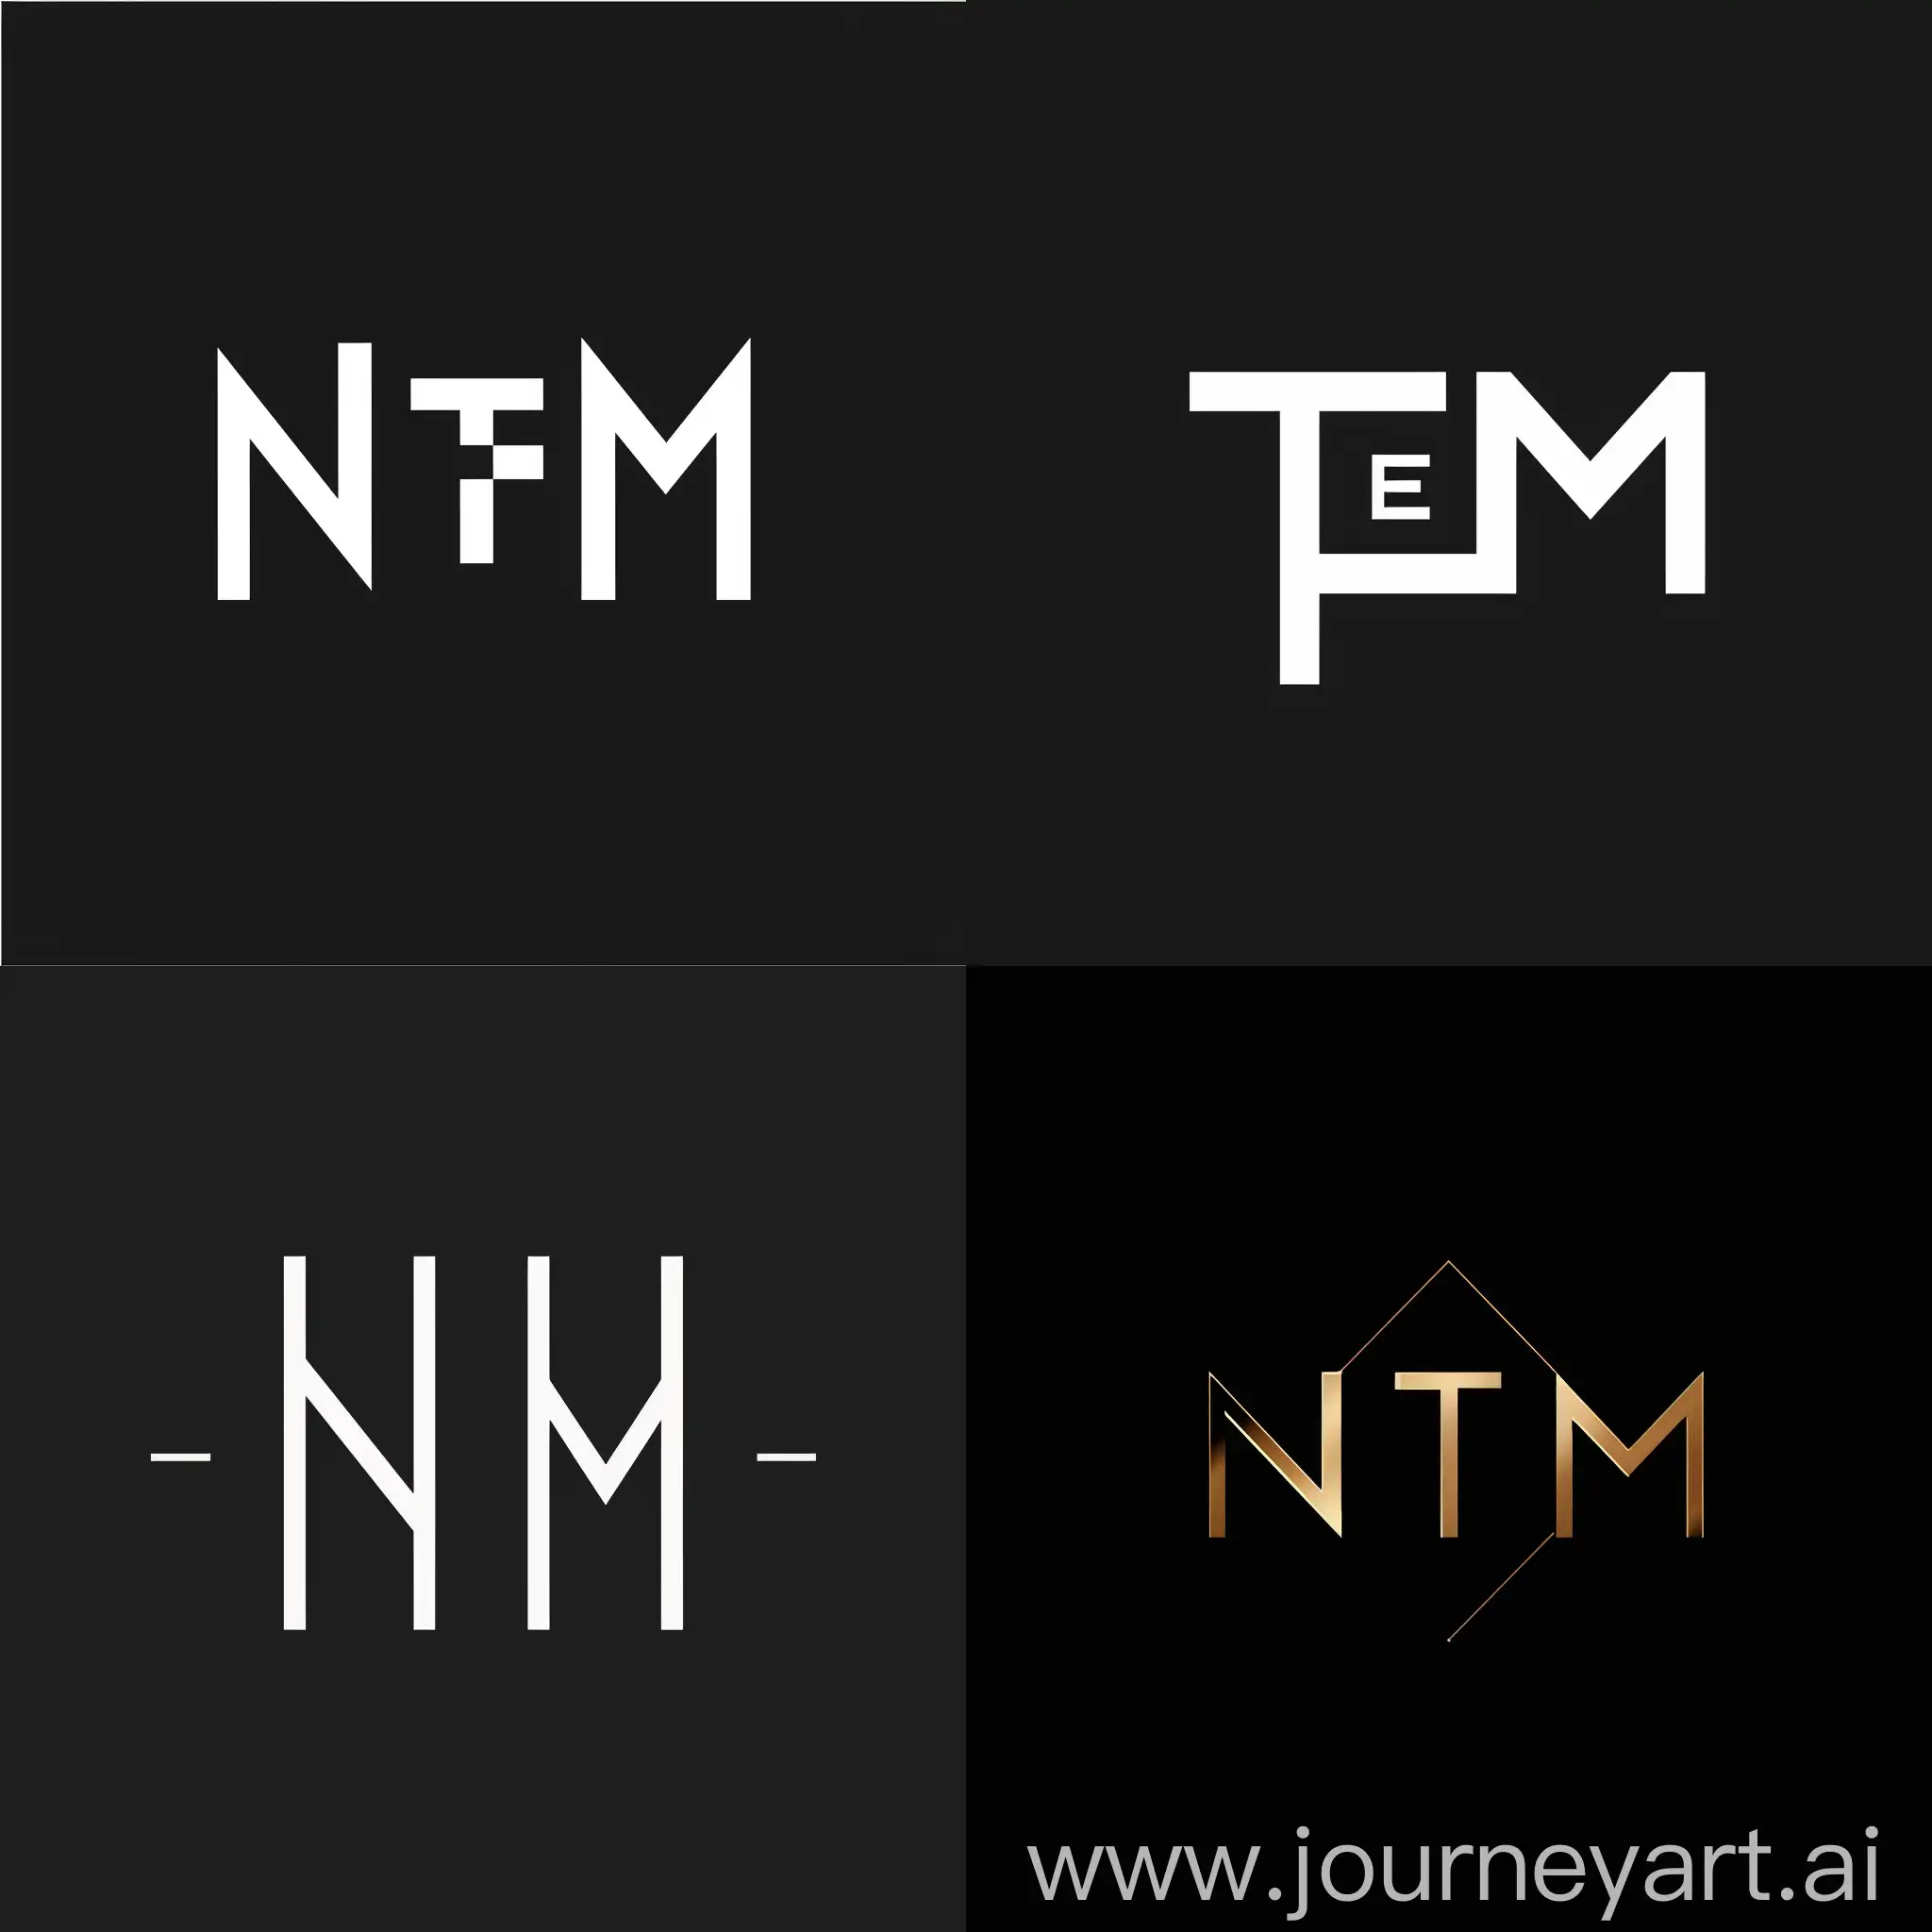 make a simple logo of "N T E M" that have "N" letter inside of "M"